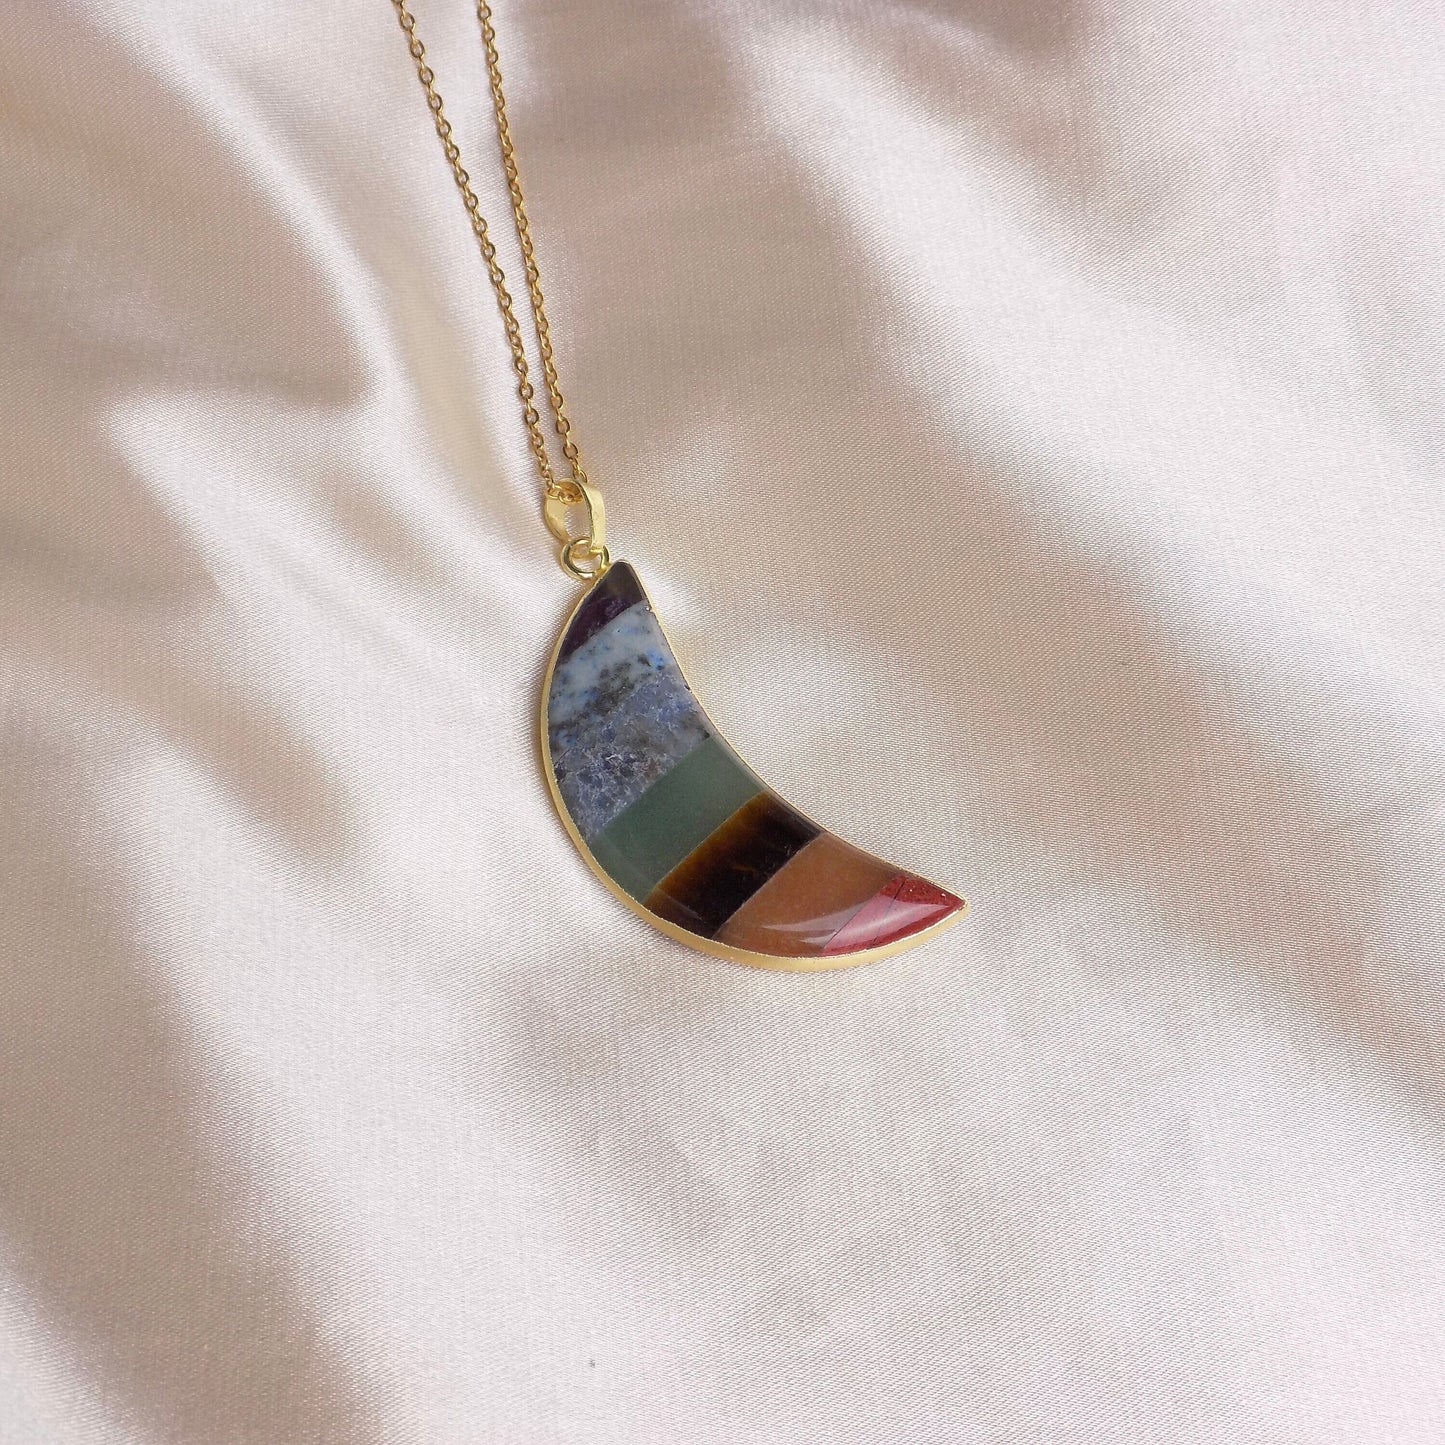 Seven Chakra Crystal Necklace Gold, Large Crescent Moon Necklace Boho Layer, Gift Women, M7-26